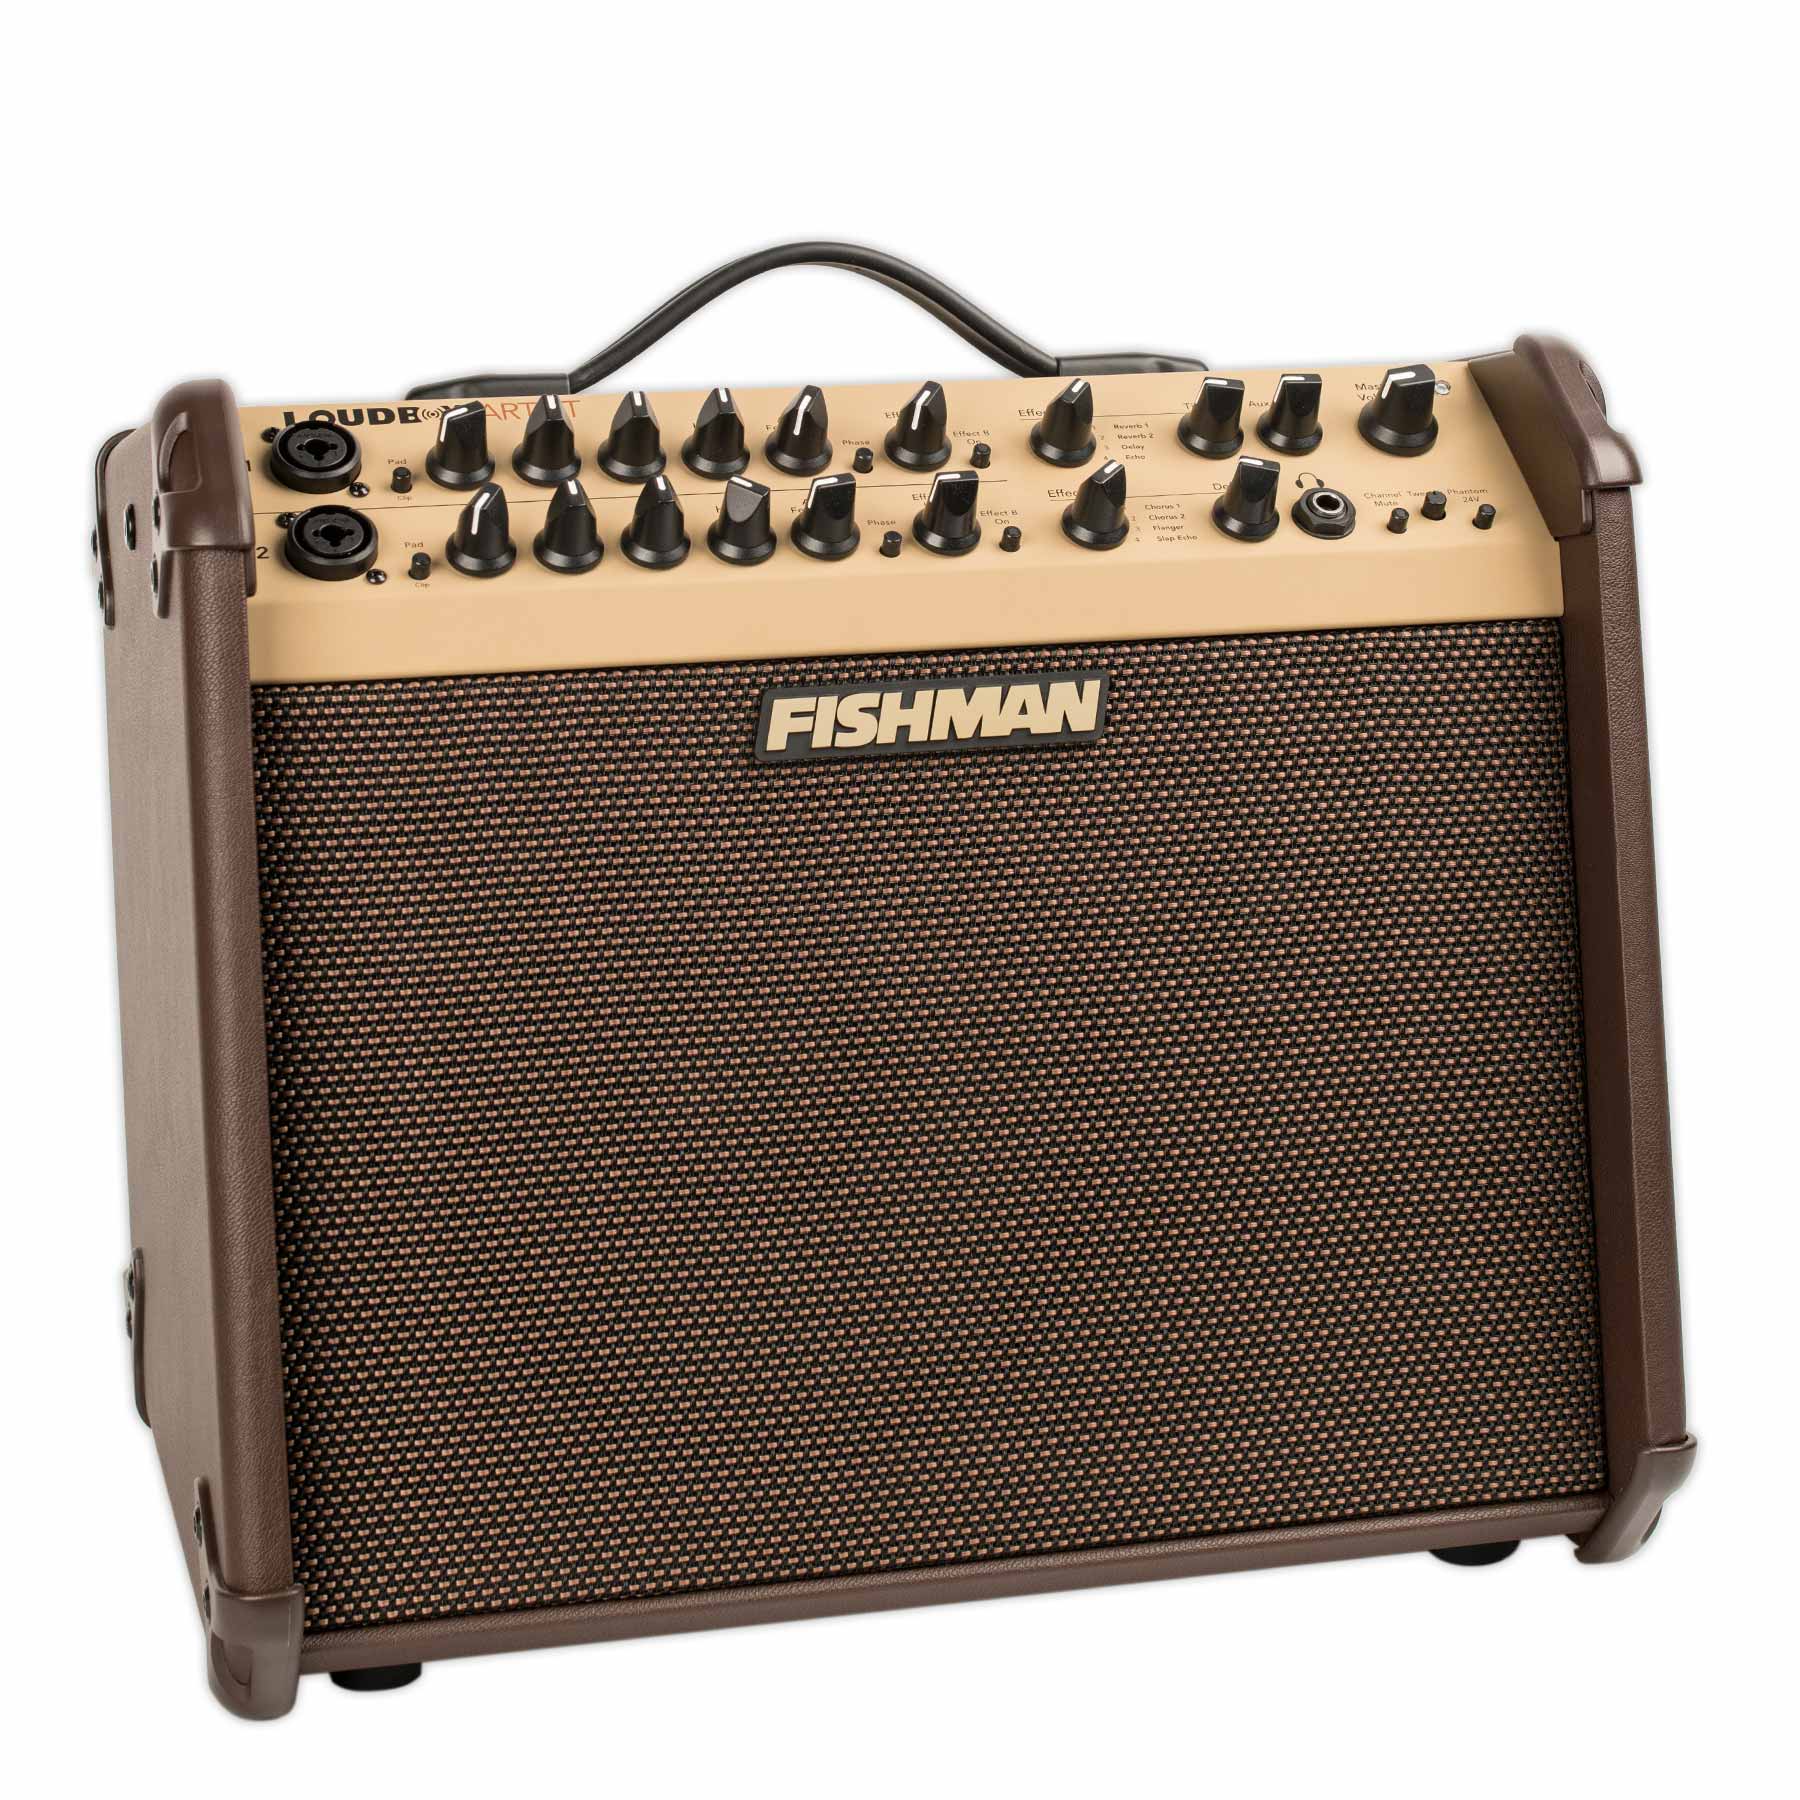 USED FISHMAN LOUDBOX ARTIST WITH COVER